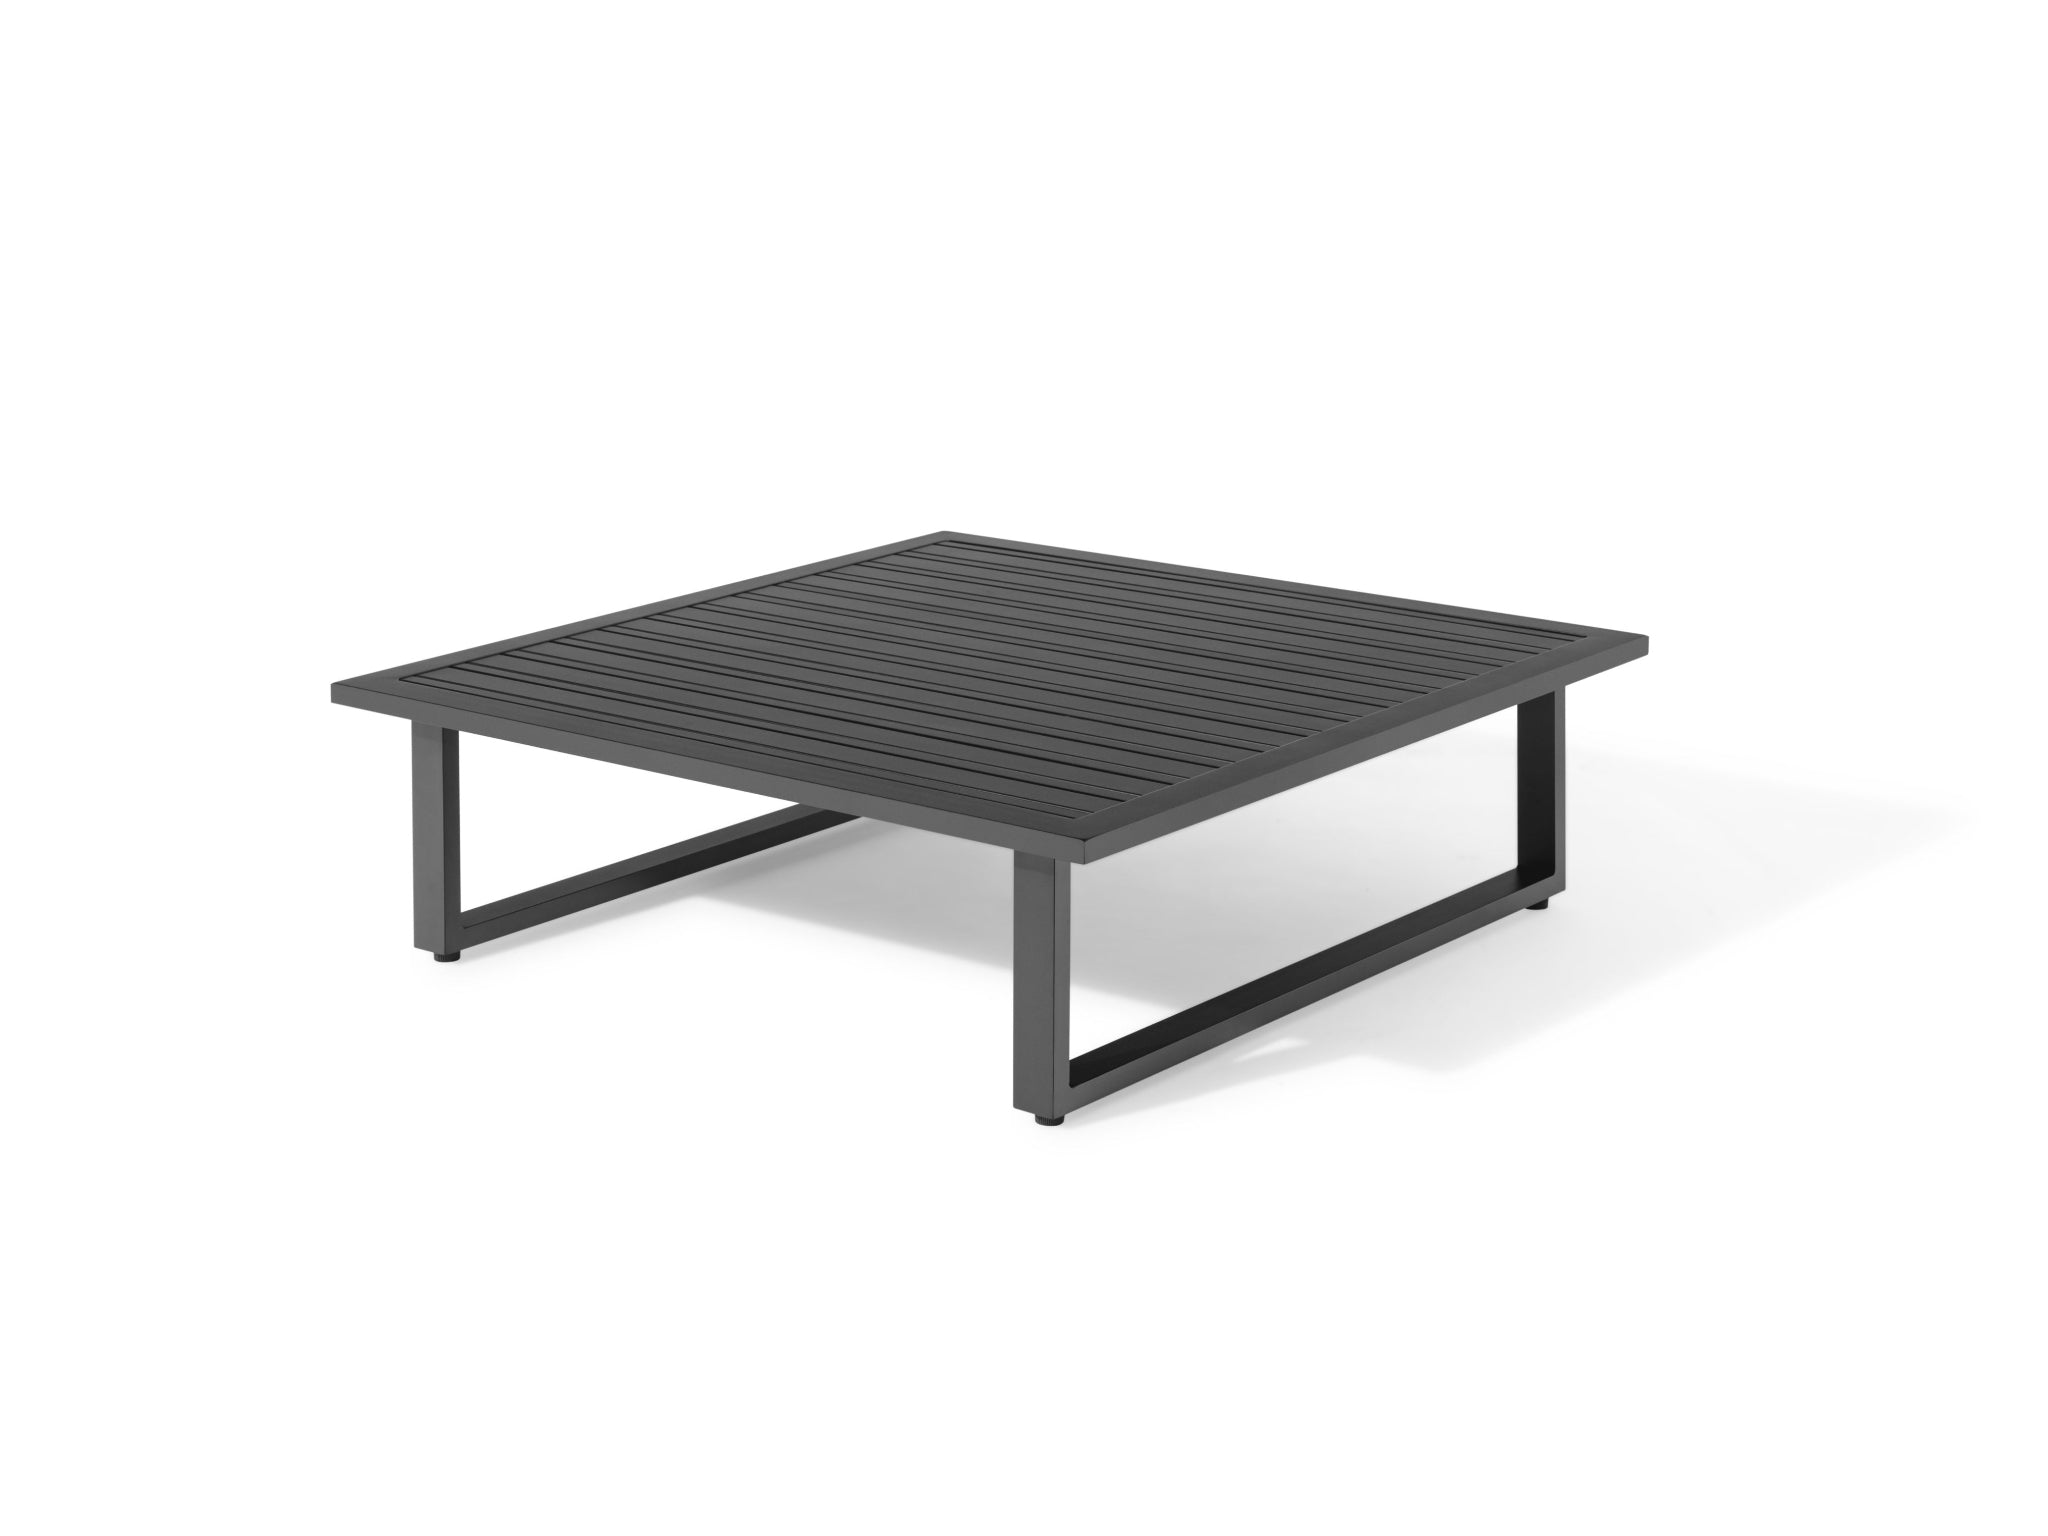 SIMPO by Sunlongarden Ethos Coffee Table